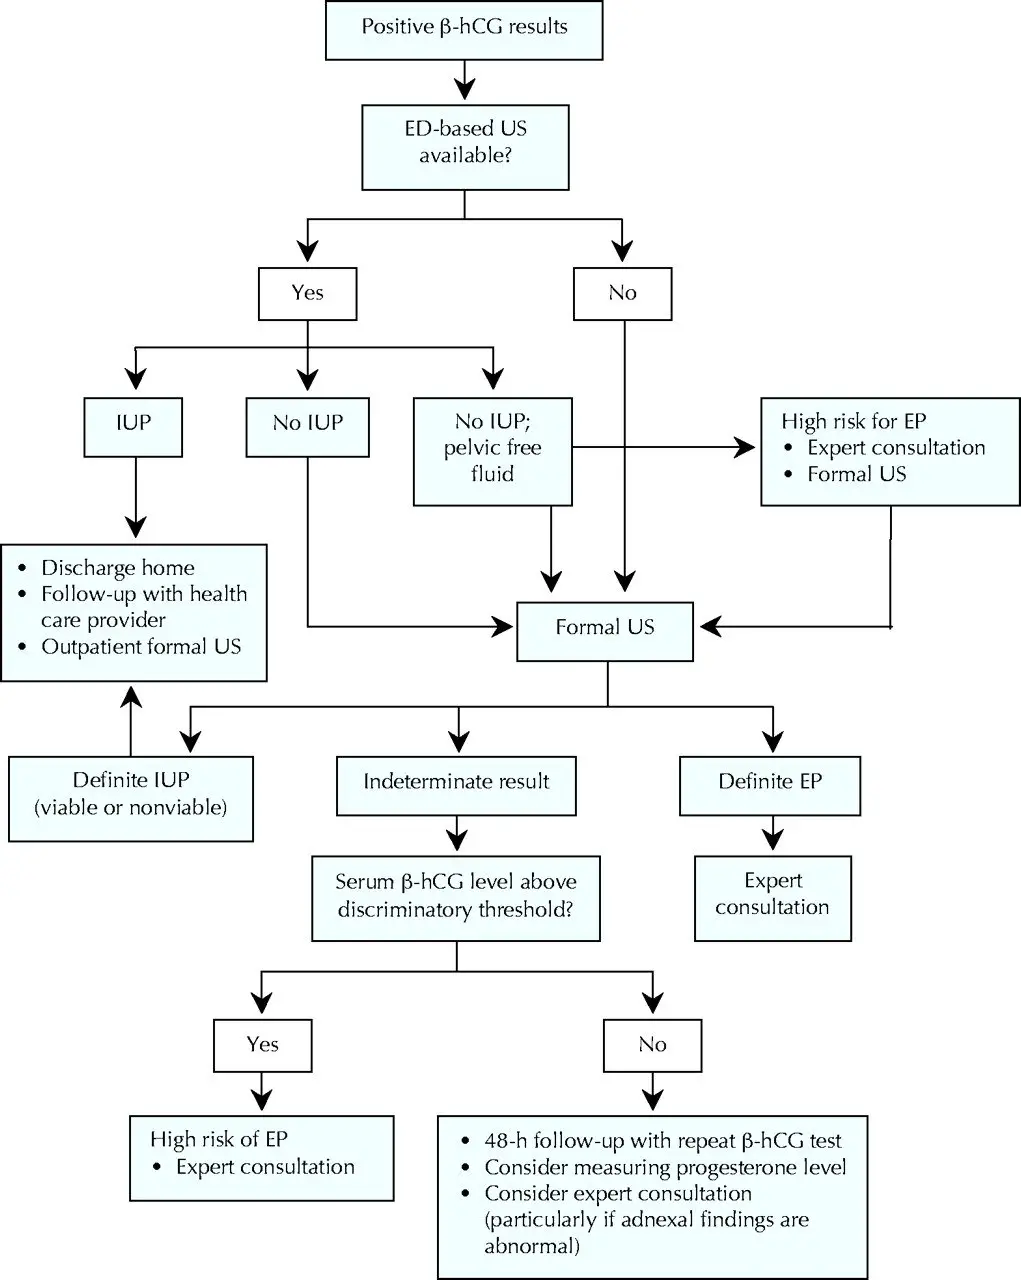 Diagnosis and treatment of ectopic pregnancy